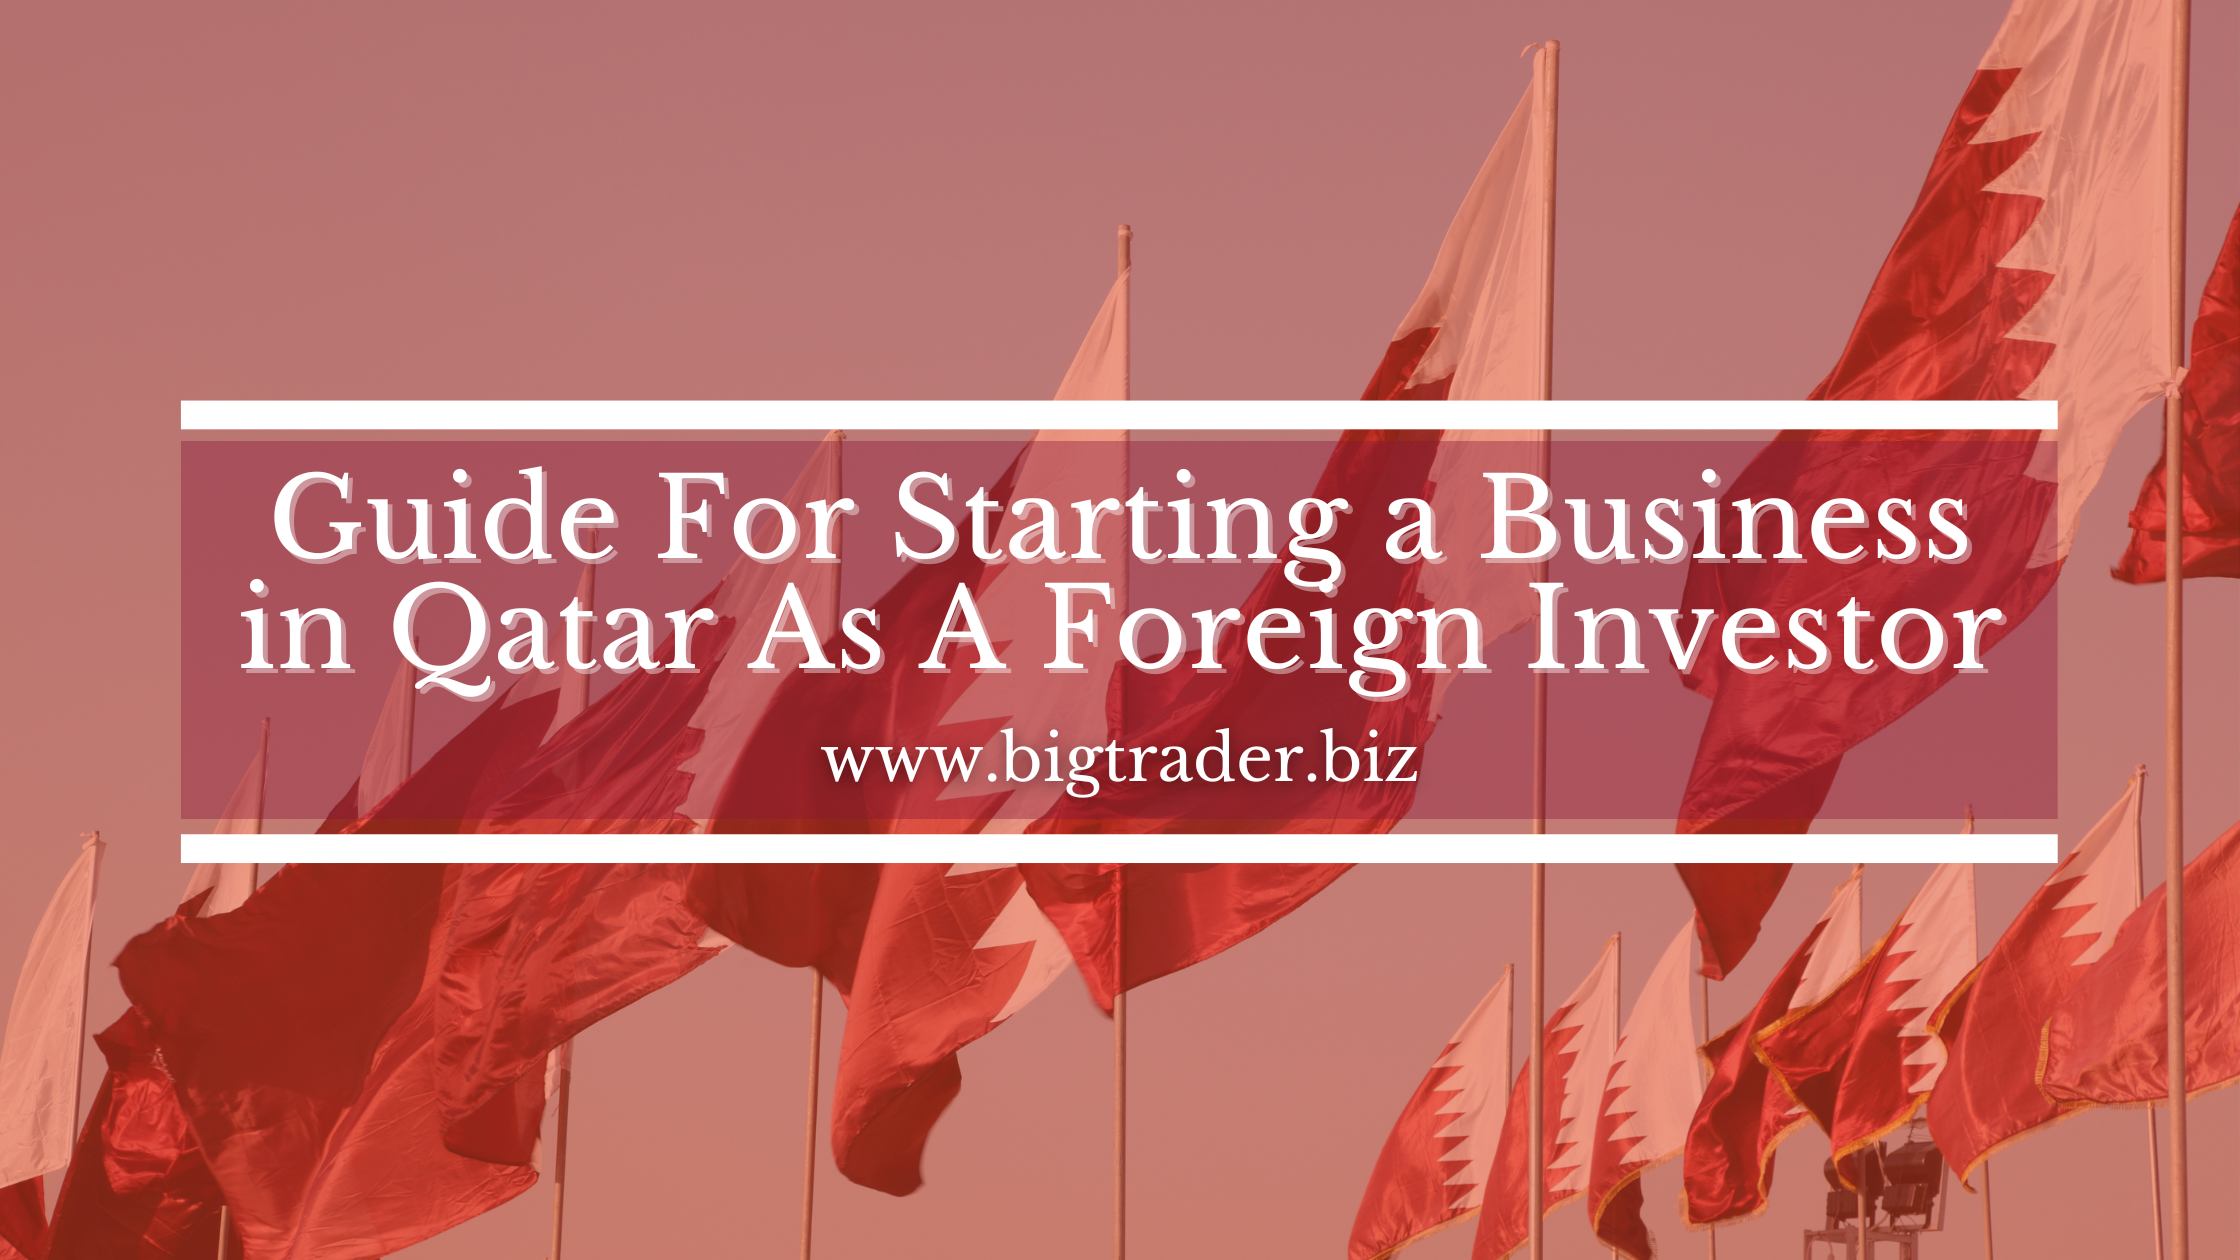 Guide For Starting a Business in Qatar As A Foreign Investor